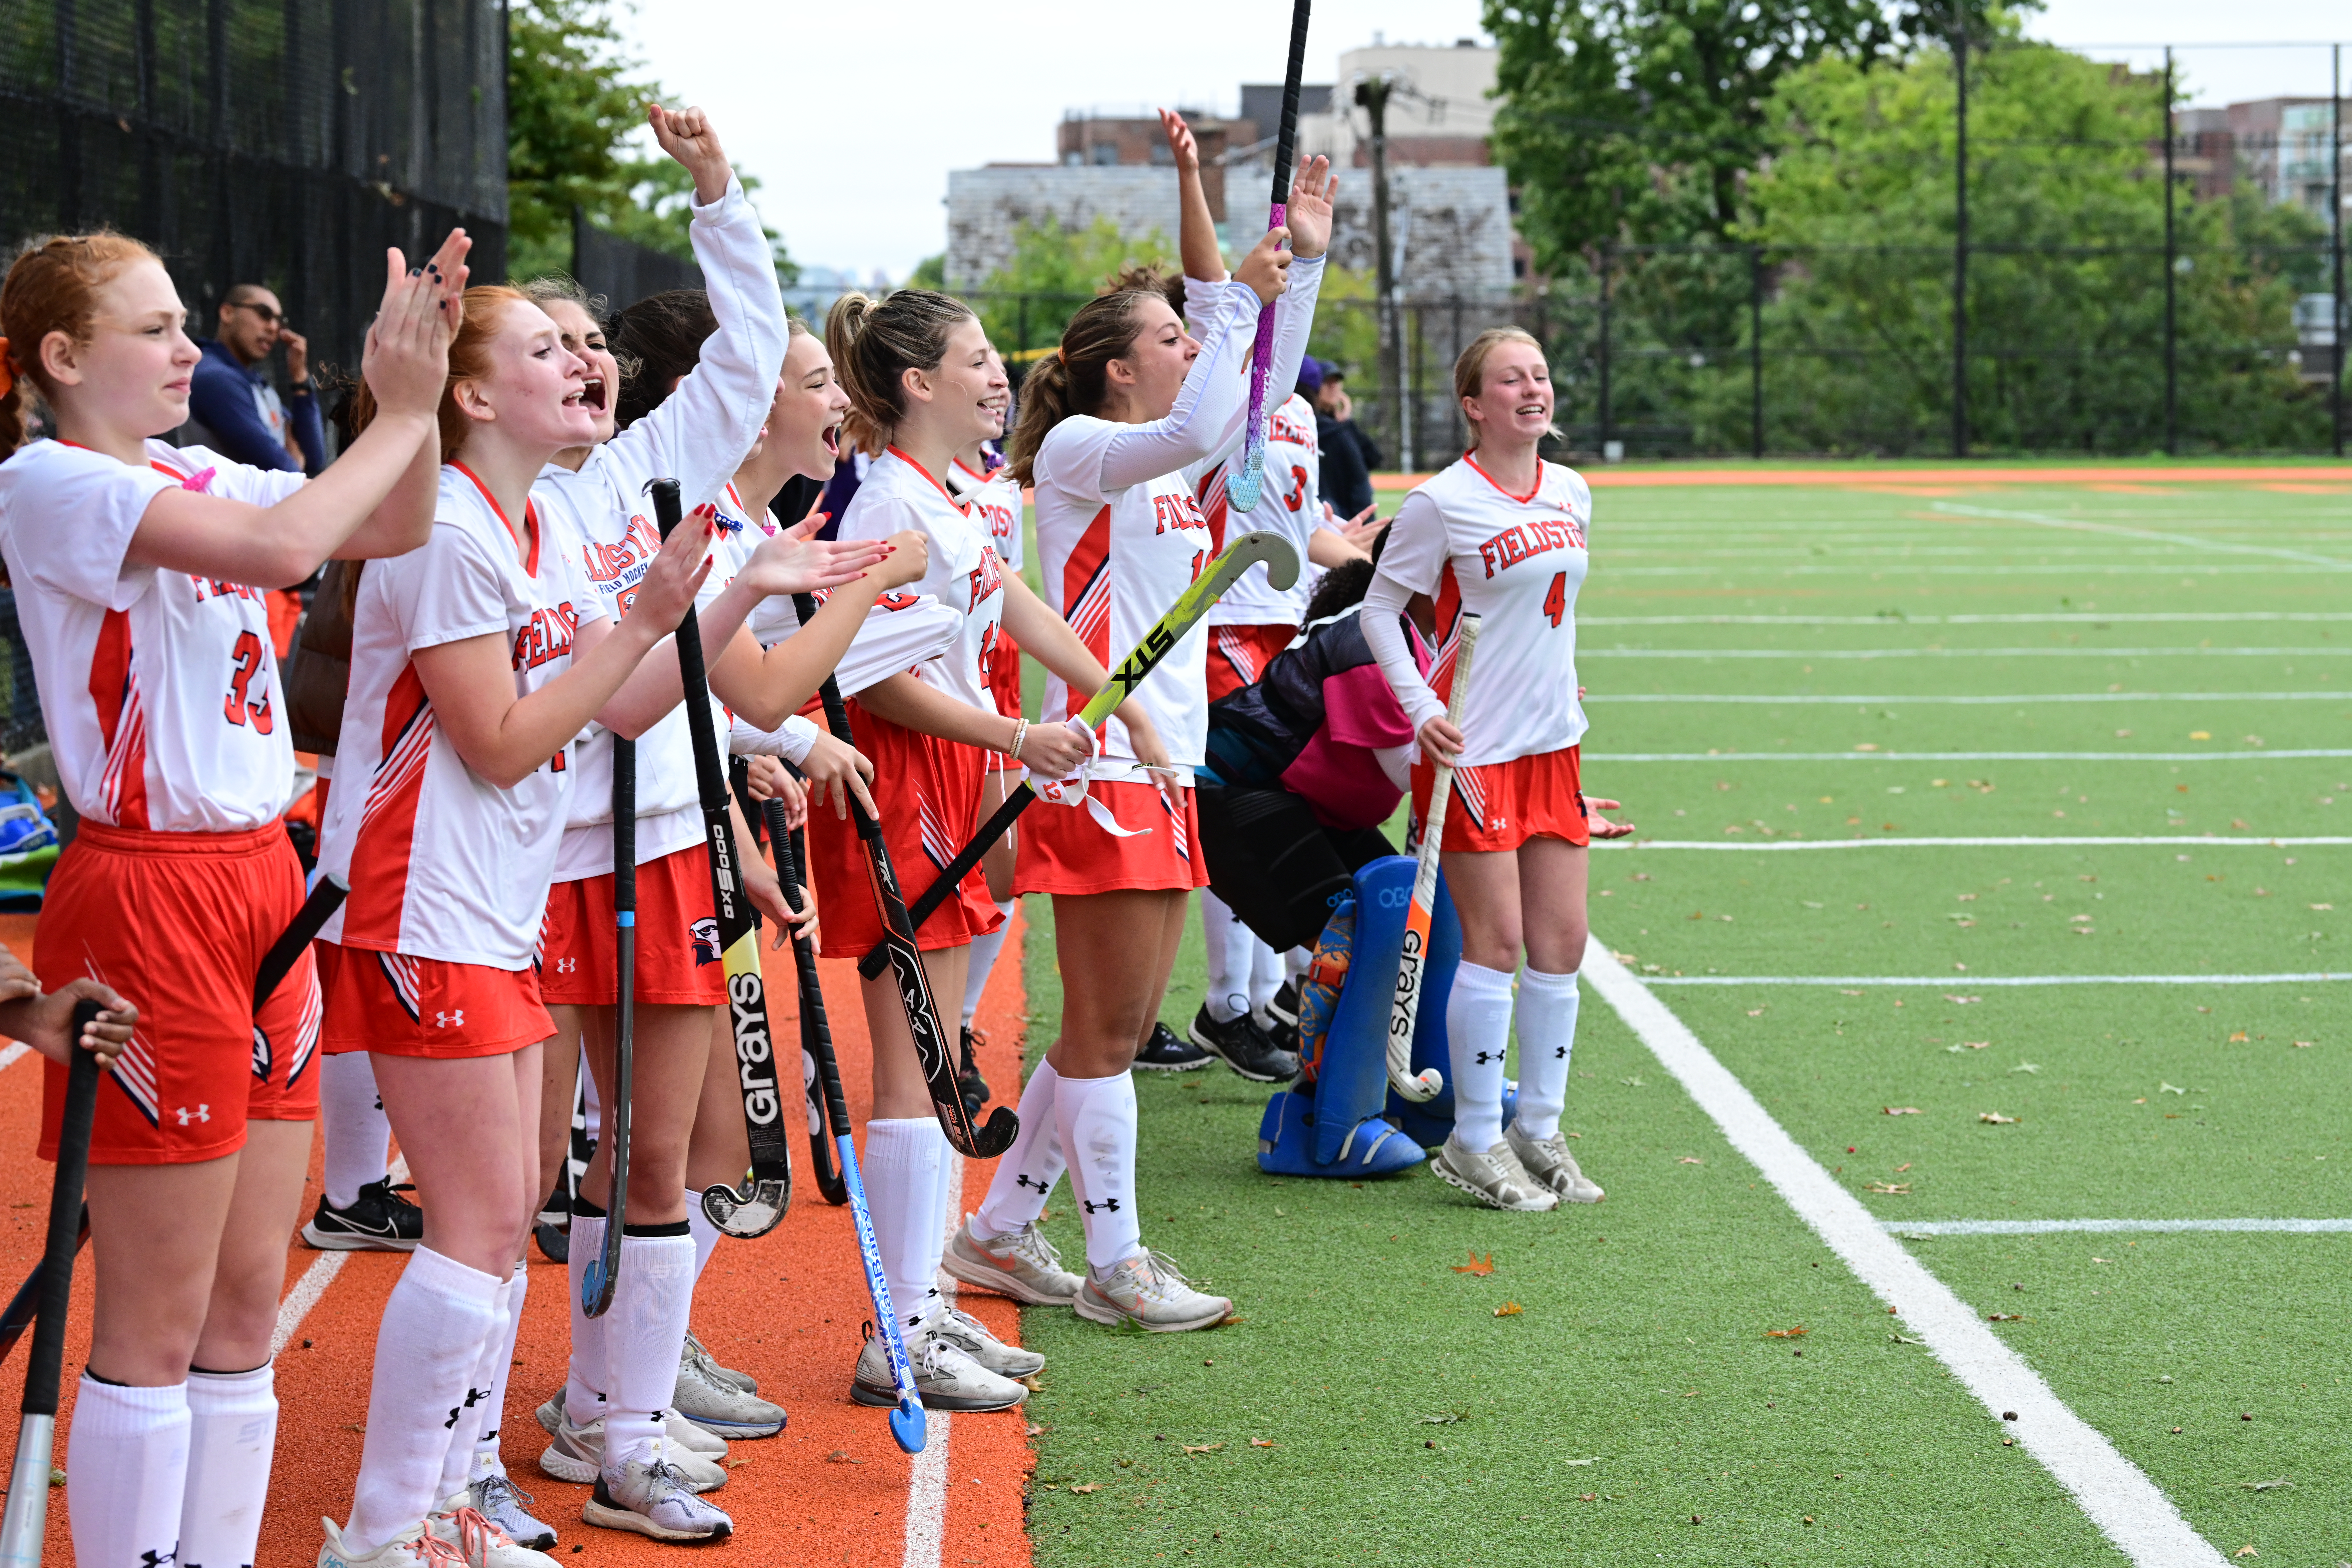 Field hockey players celebrate on the sidelines as their teammate scores a point